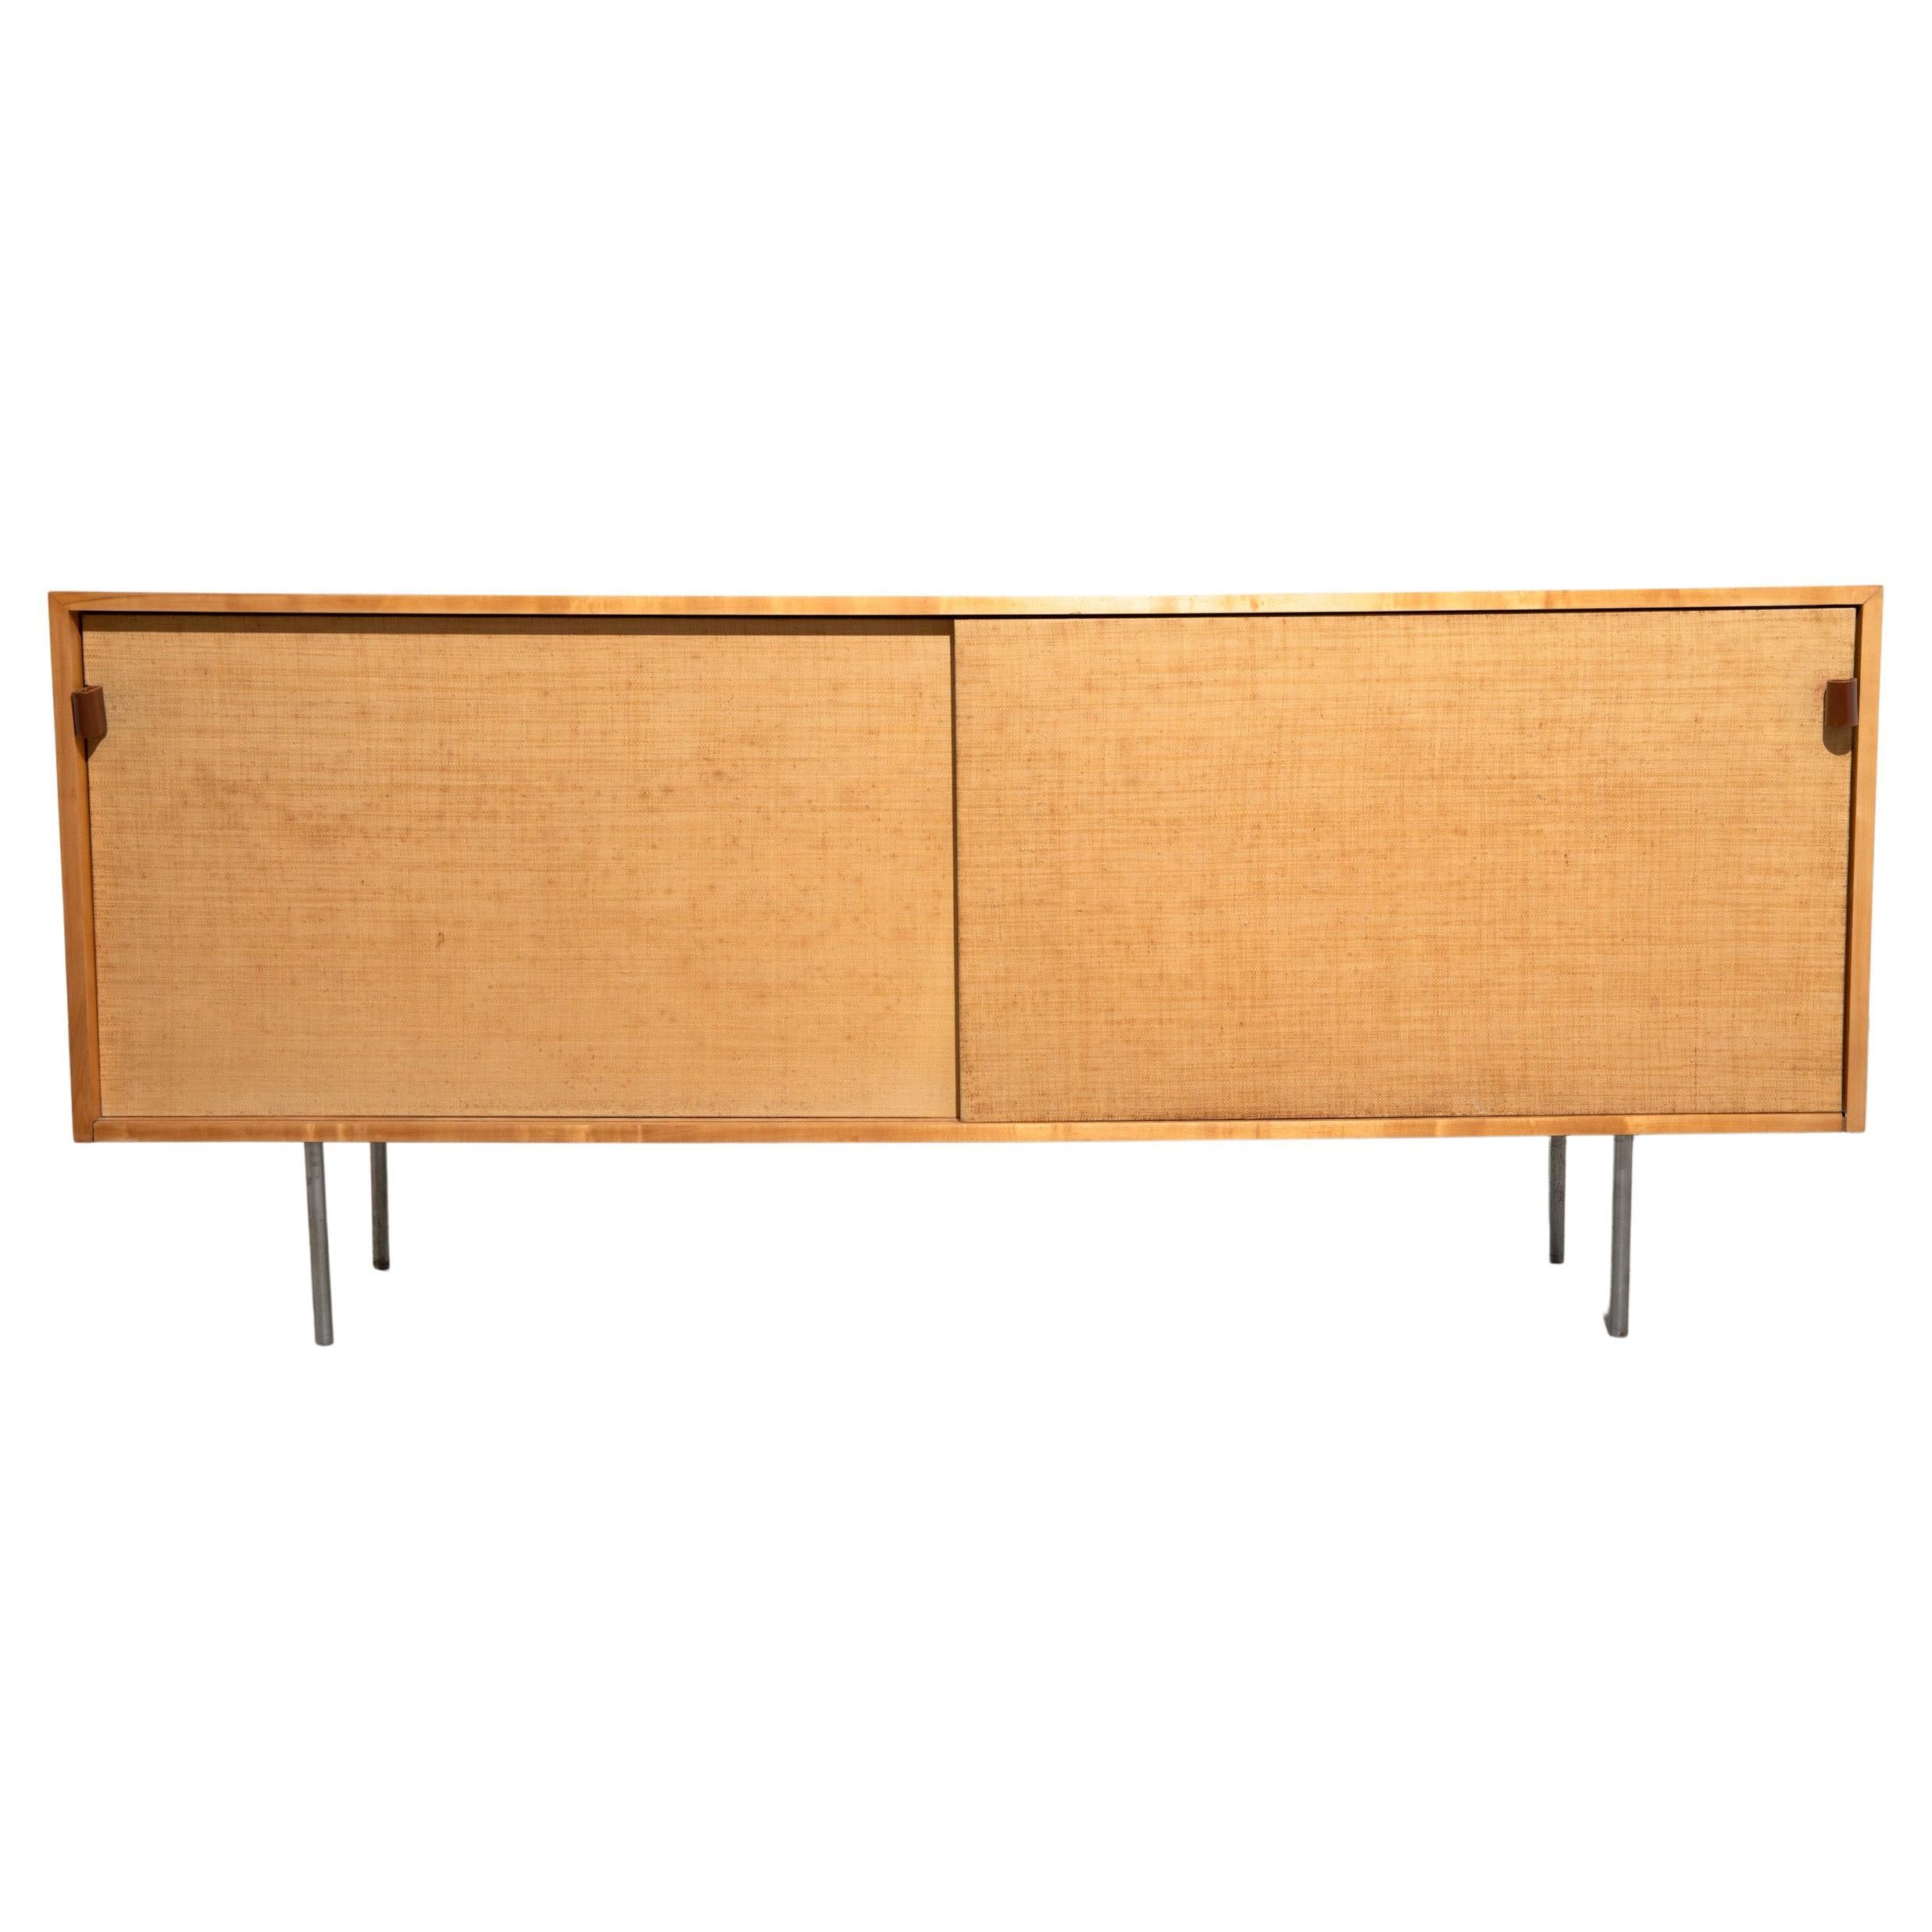  Modernist Sideboard by Florance Knoll 1960s For Sale